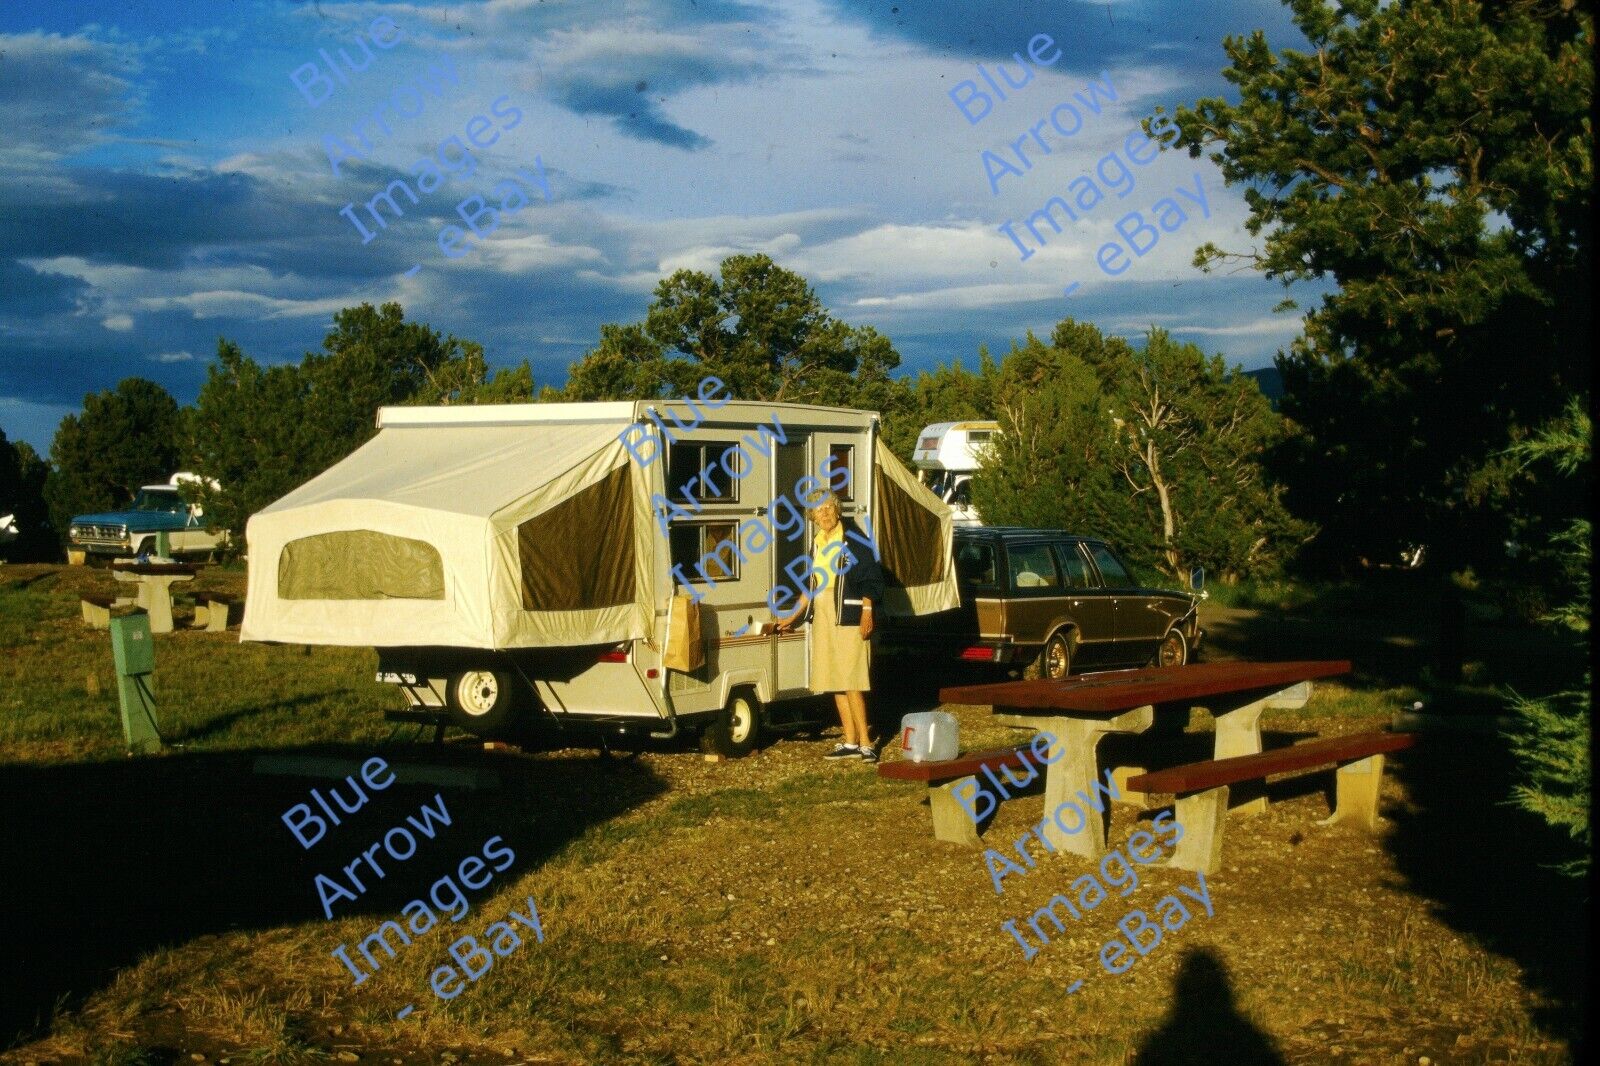 1986 35mm slide Pop-Up Camper Chevy Caprice Station Wagon Colorado Vacay #1819